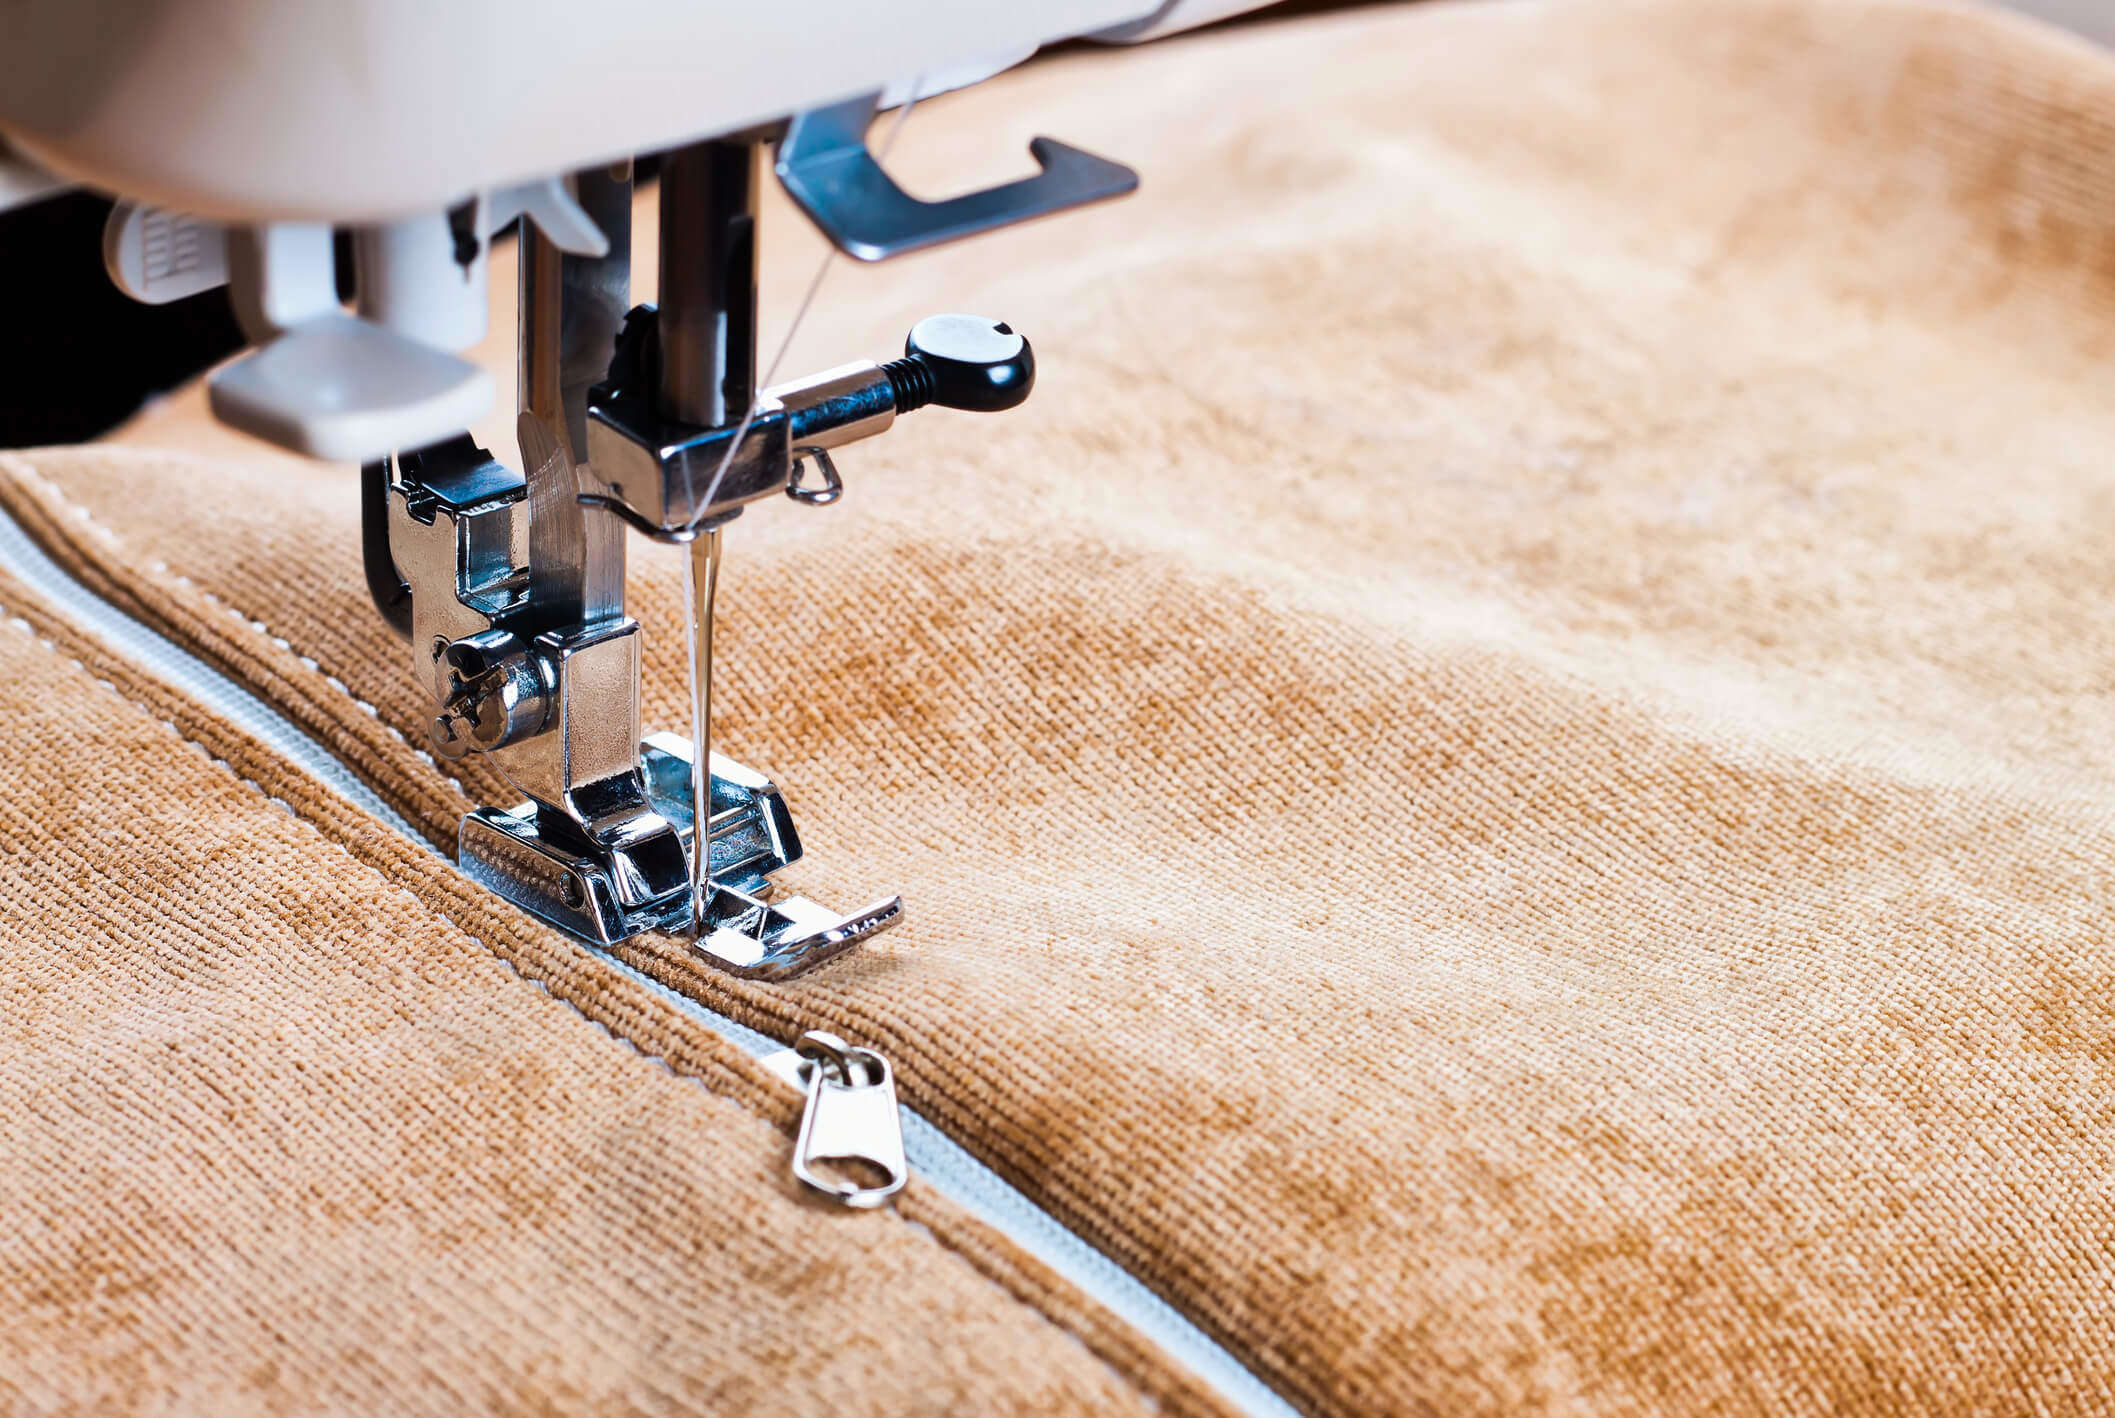 A close up of a sewing machine sewing a zip onto a brown velvet jacket